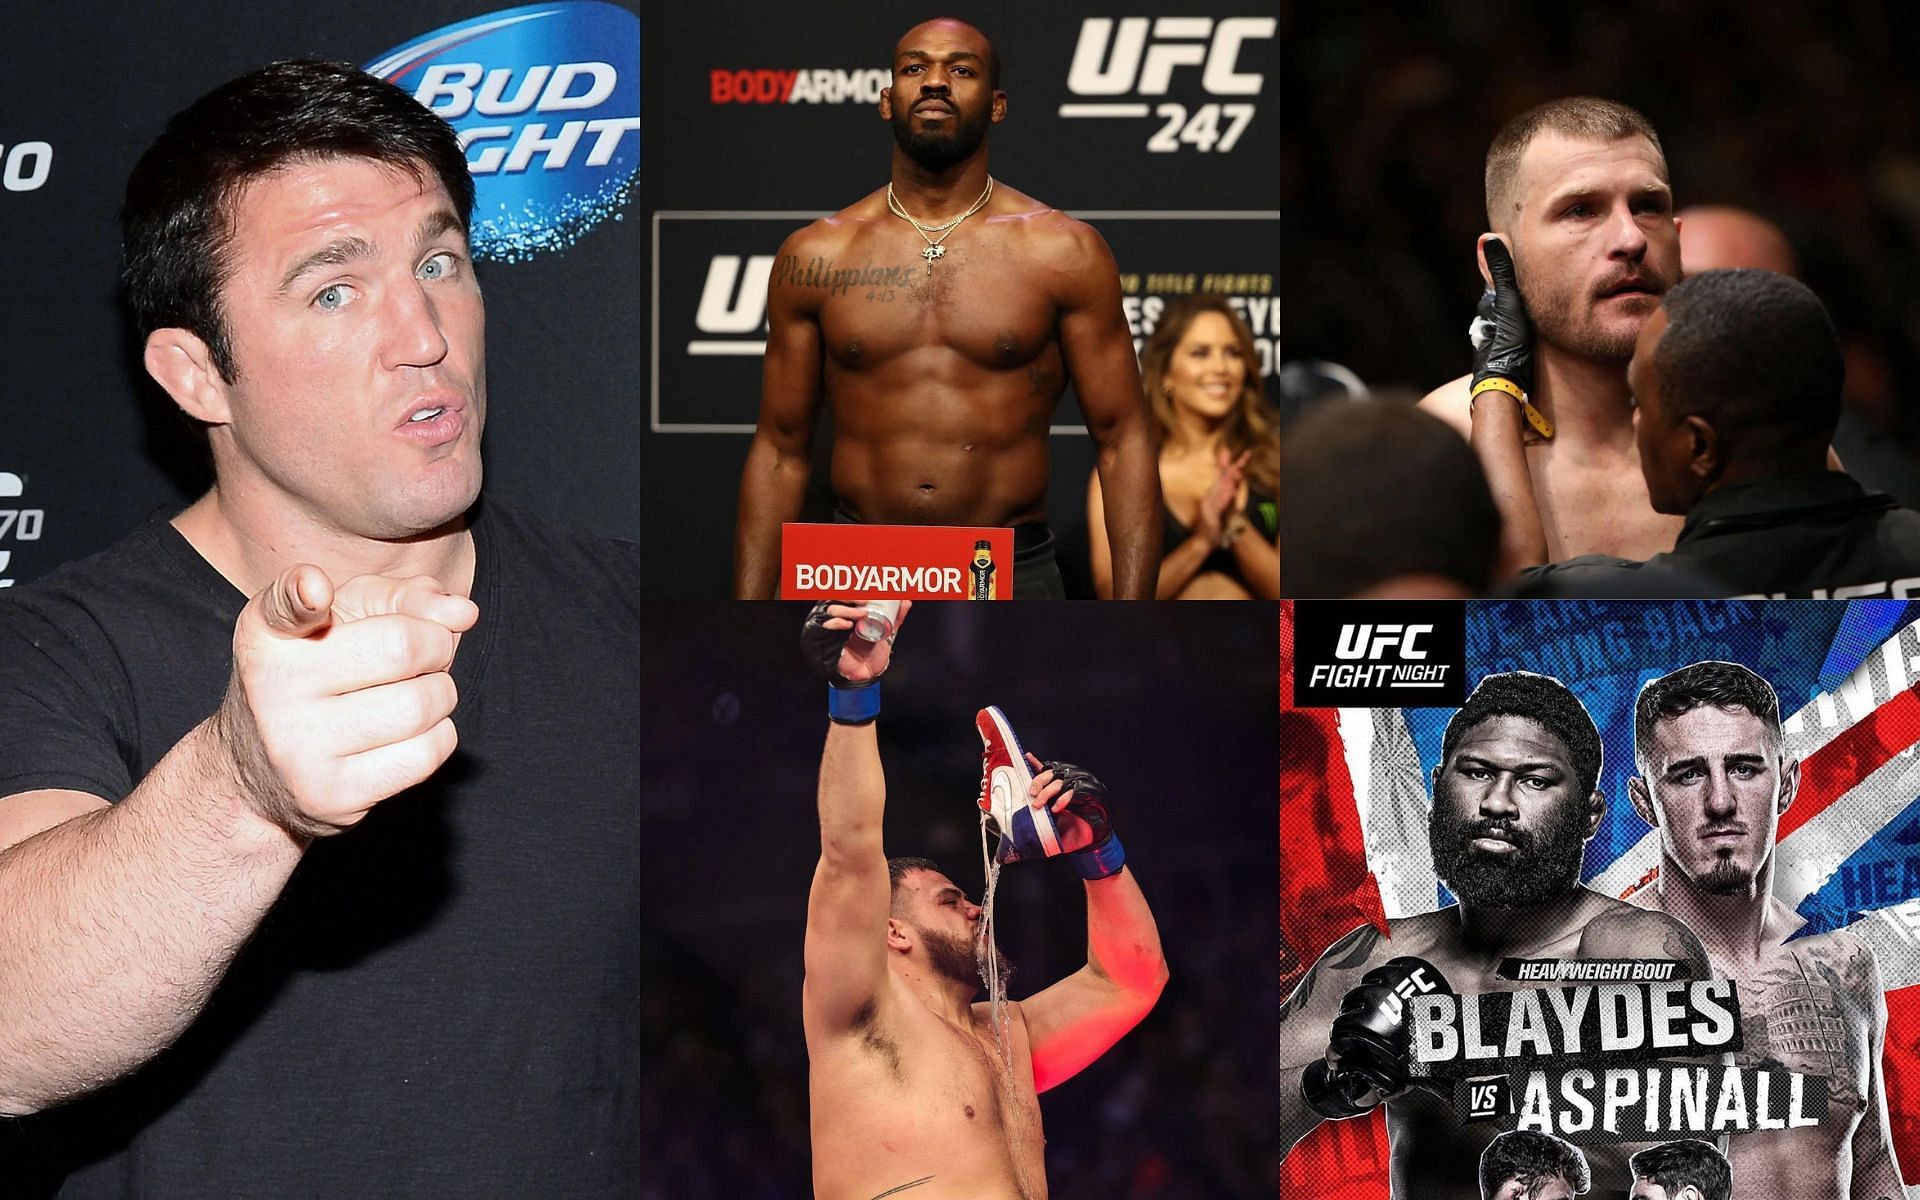 Chael Sonnen (left), Jon Jones (top center), Tai Tuivasa (bottom center), Stipe Miocic (top right), Curtis Blaydes vs. Tom Aspinall poster (bottom right) [Images courtesy of Getty and @tomaspinallofficial Instagram]